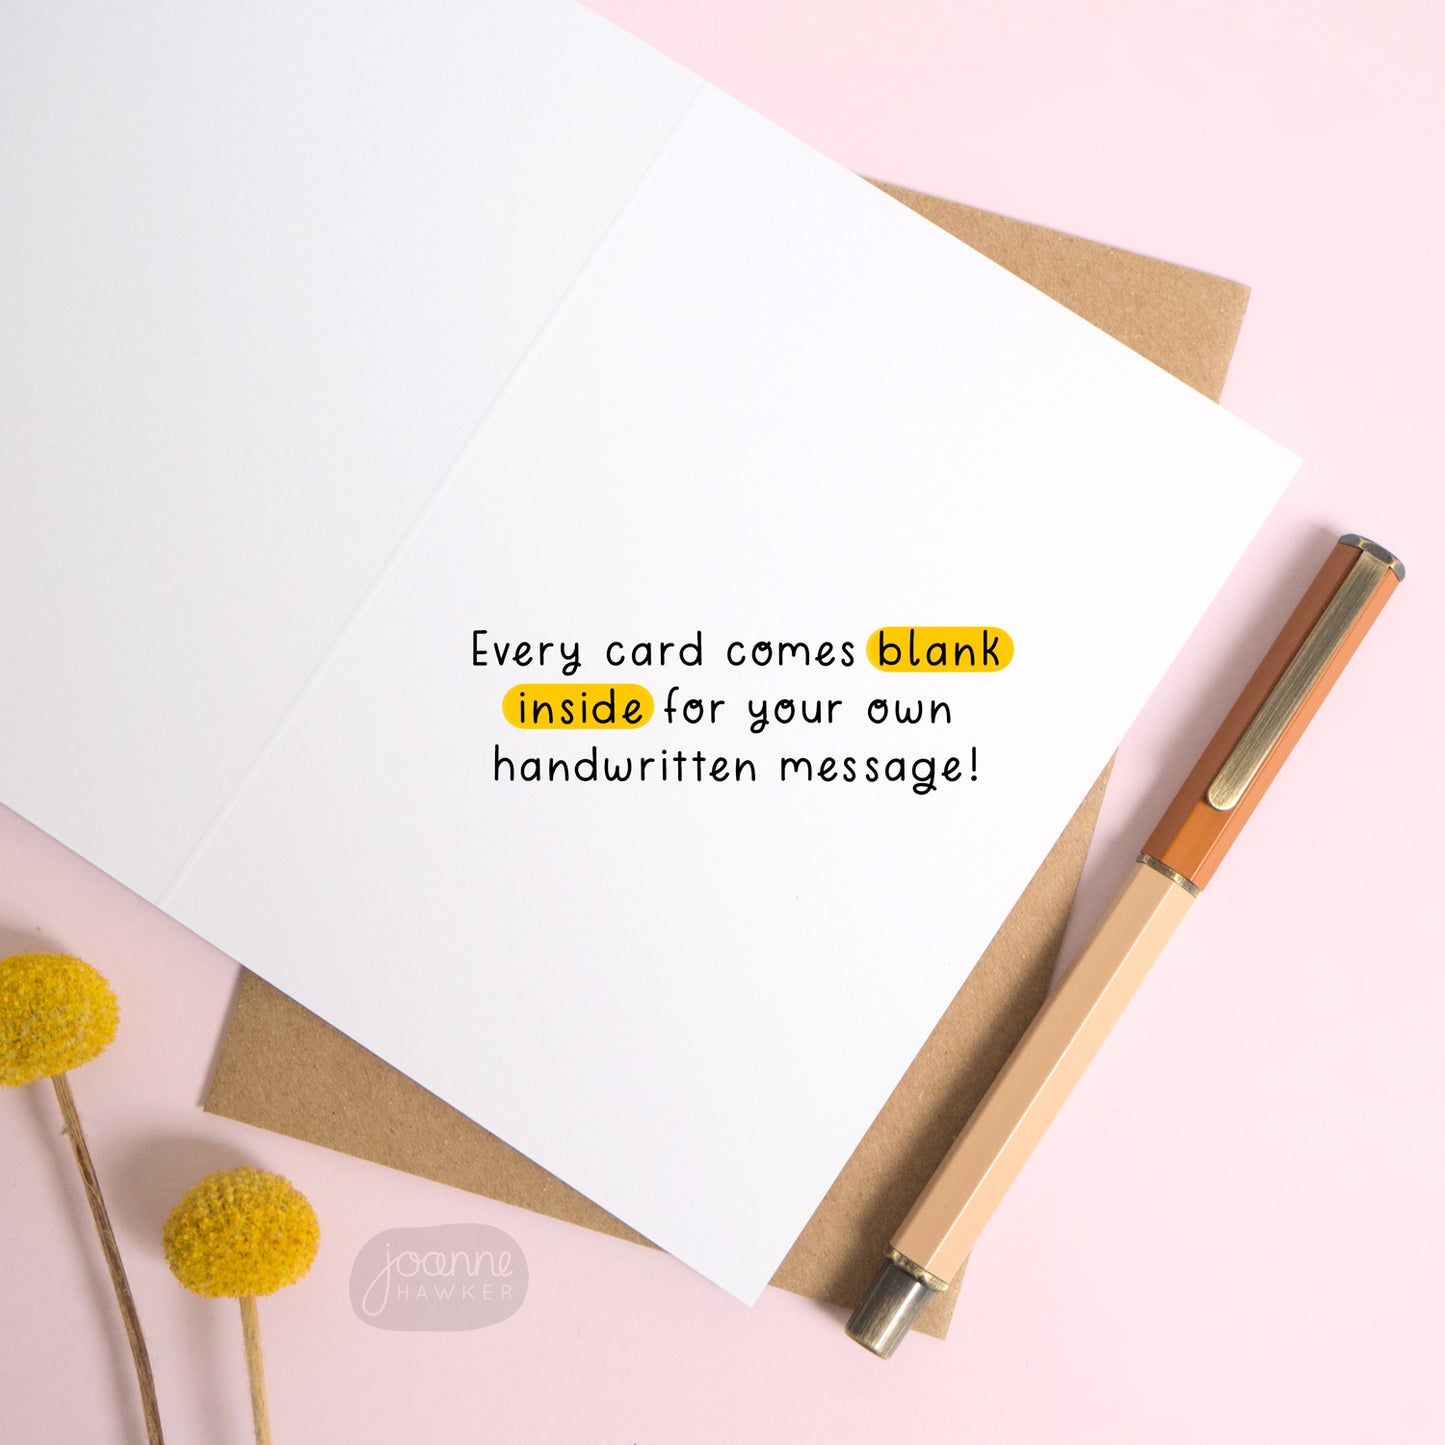 This image shows the inside of the greetings card. There is text overlaid the card reading “every card comes blank inside for your own handwritten message!” The card is open over the top of a Kraft brown envelope and photographed on a pink background.